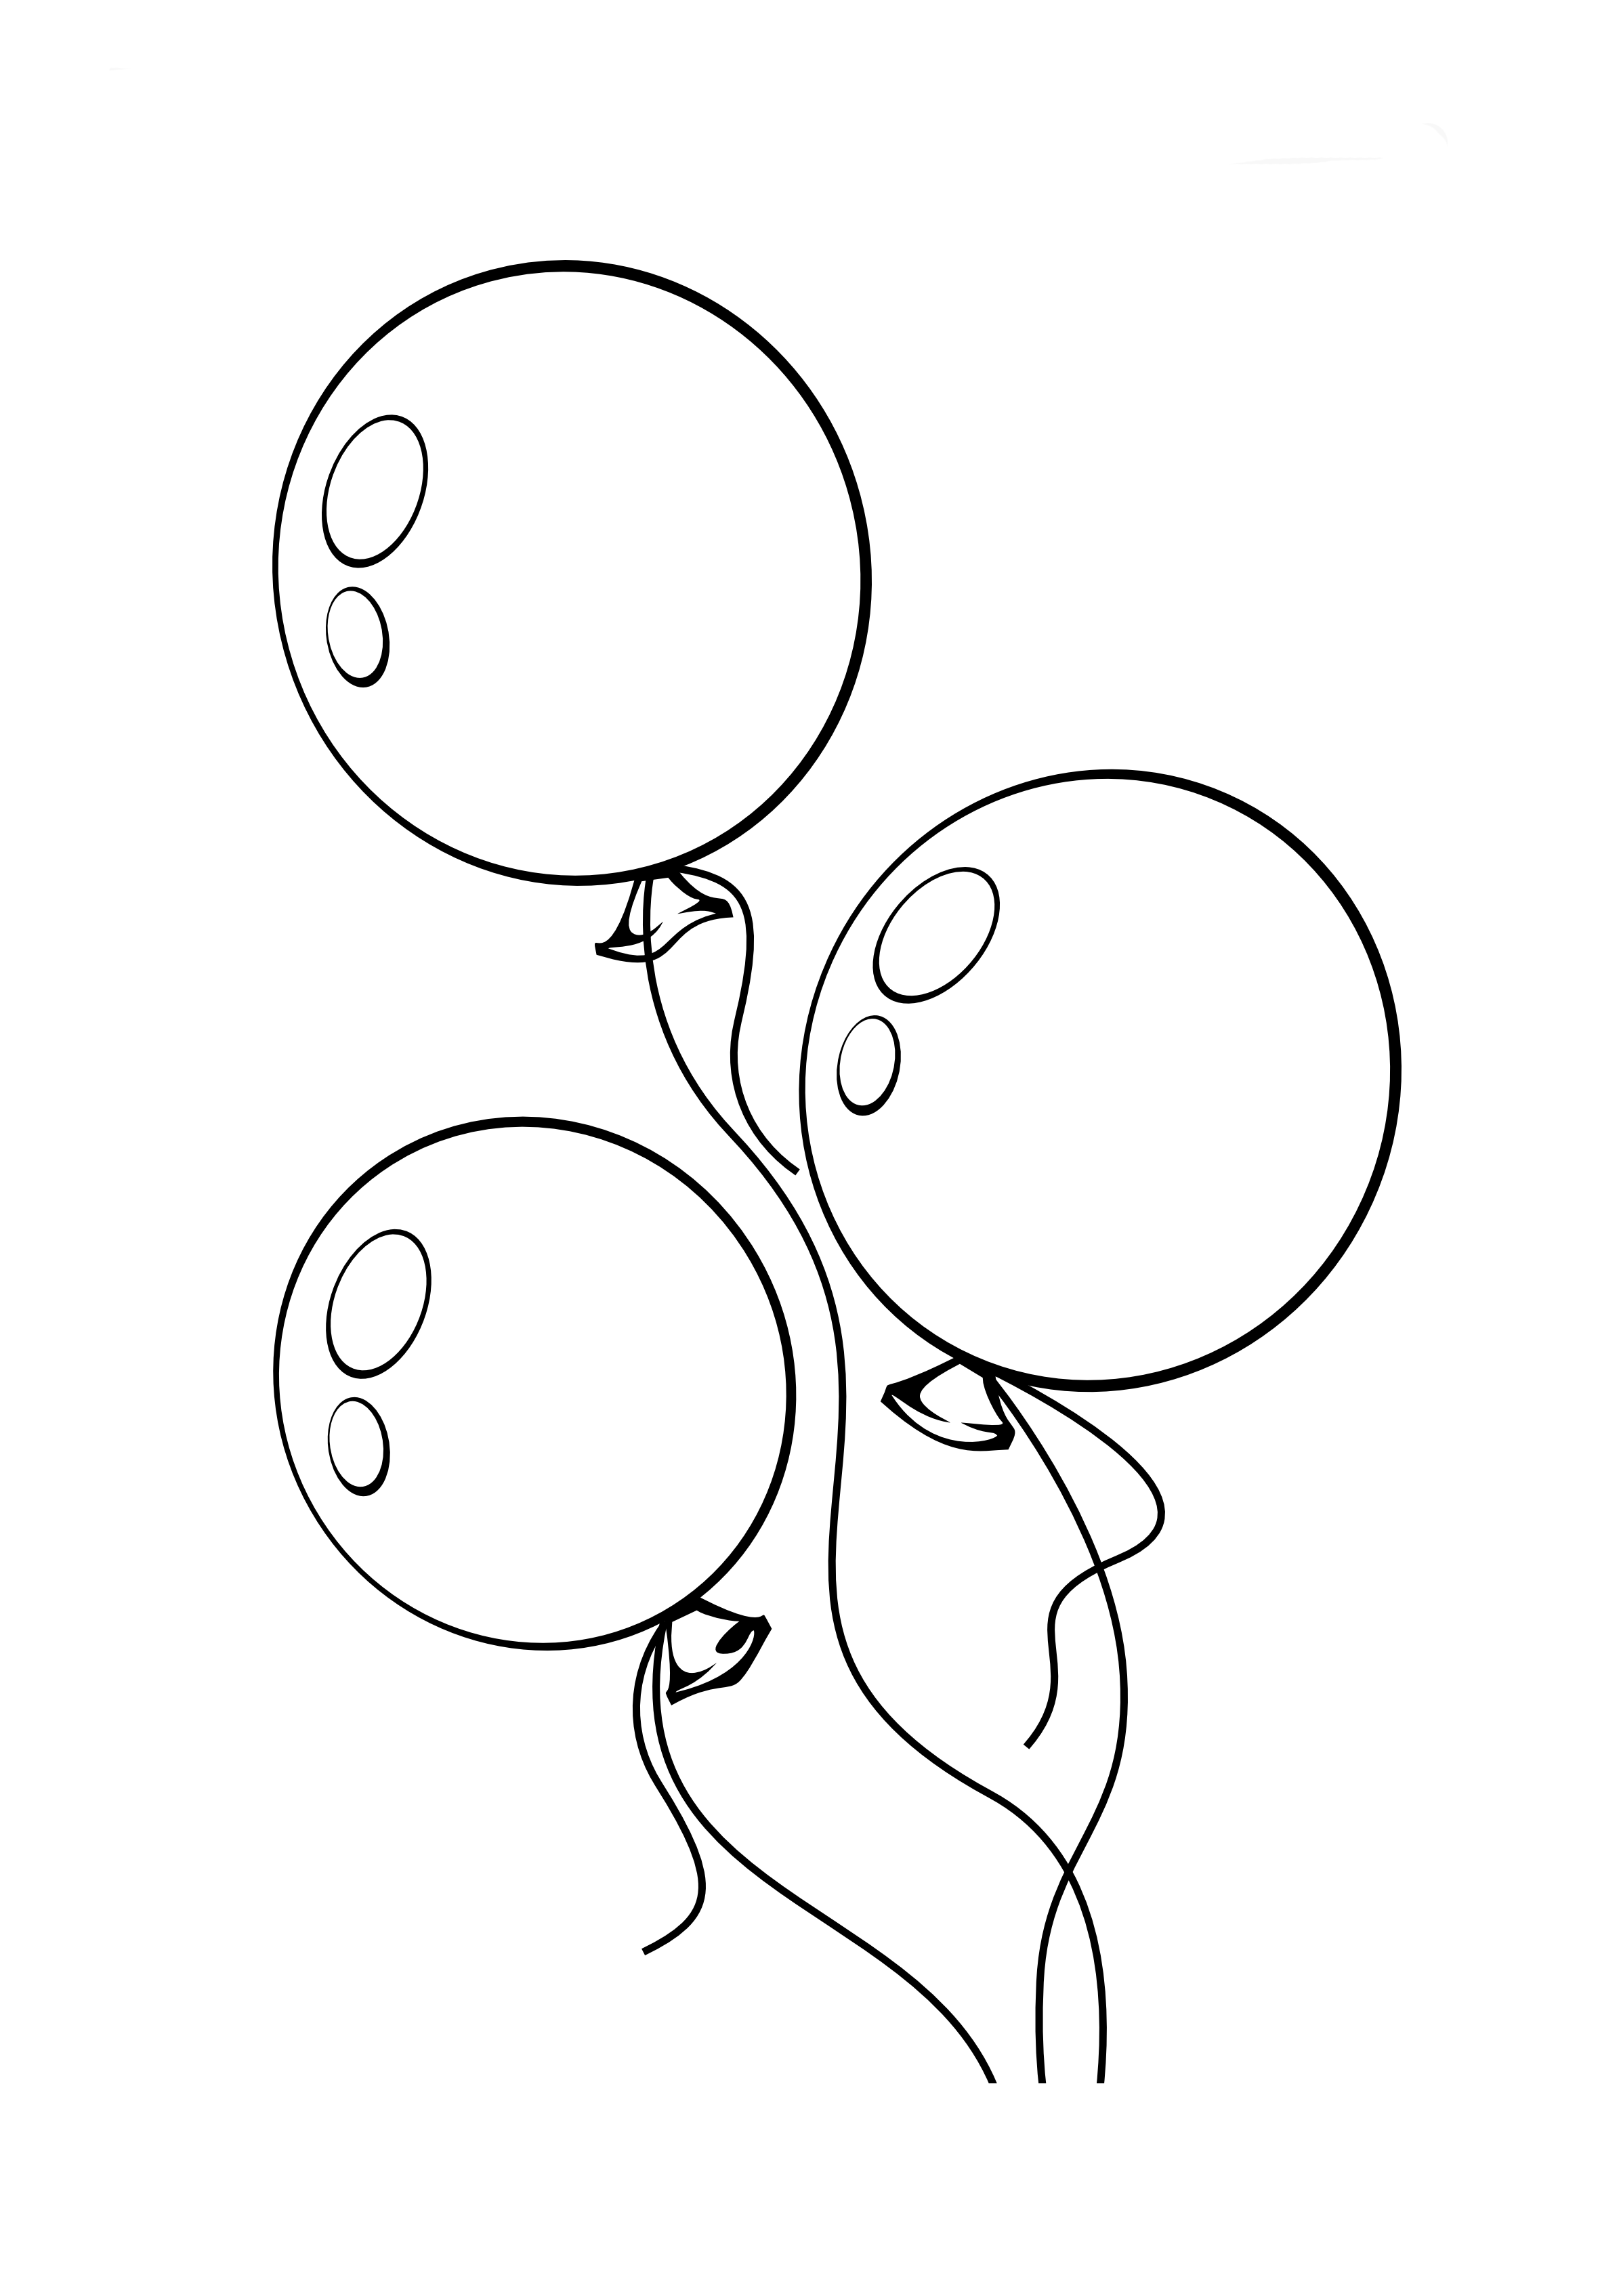 Balloon coloring pages for kids to print for free